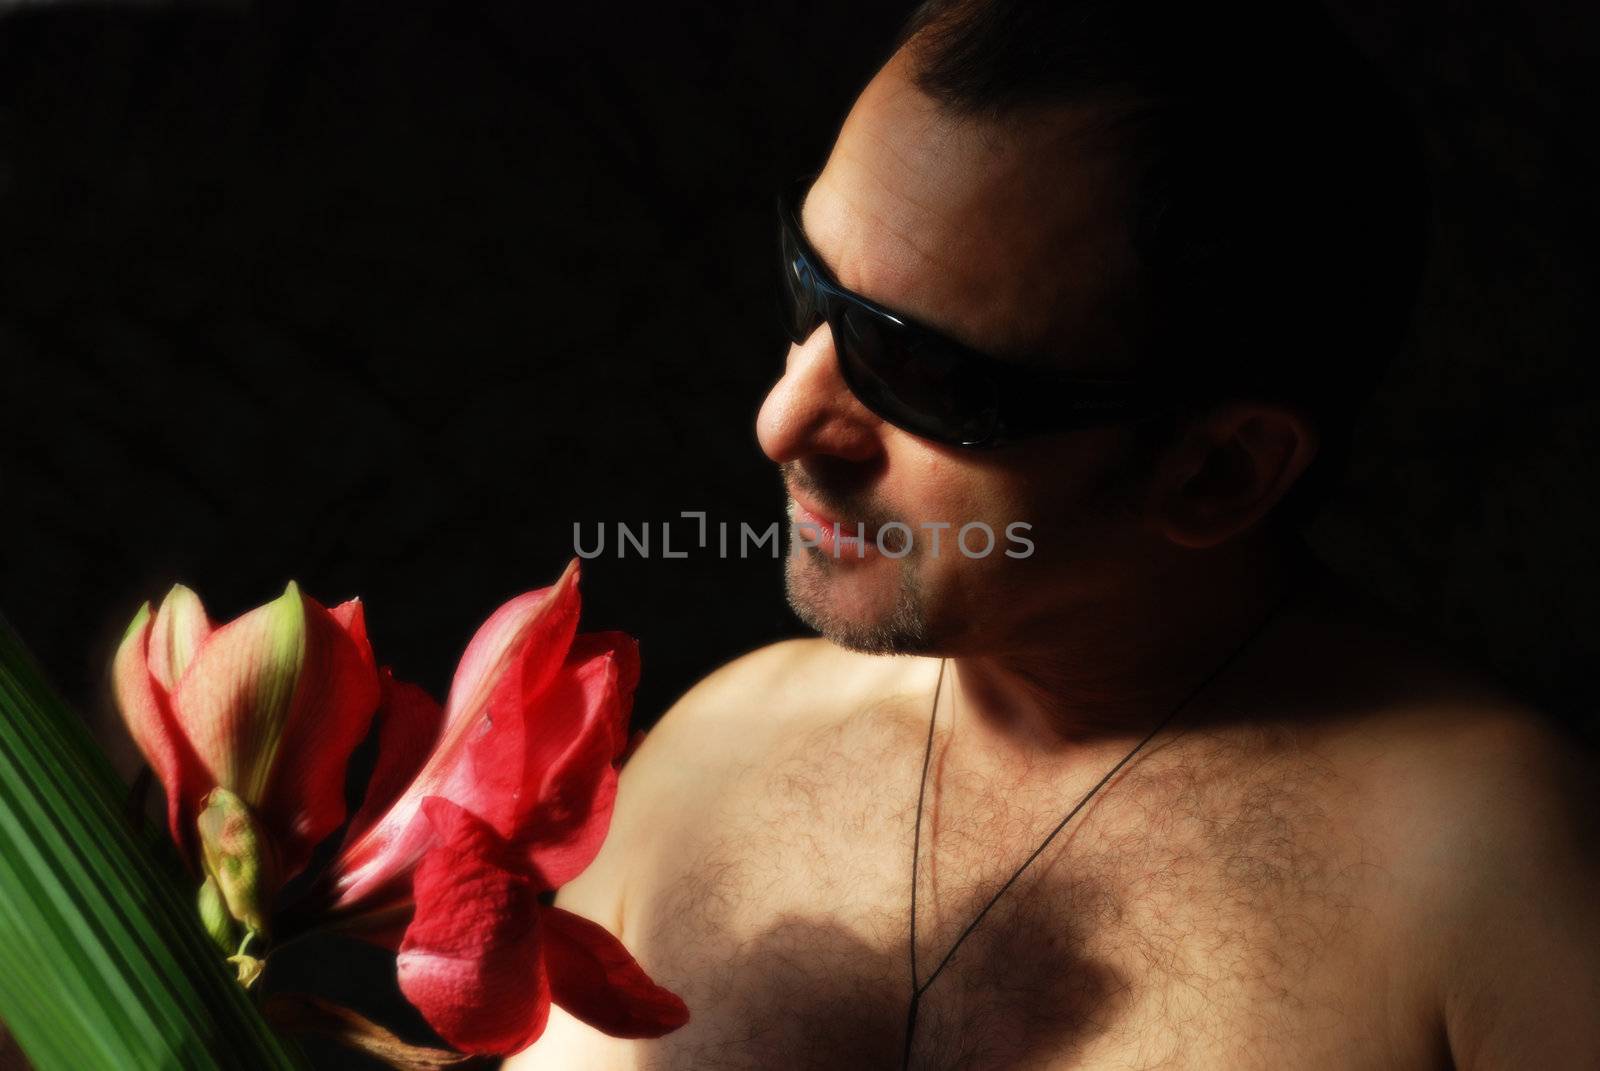 The fashionable man in sunglasses with a huge red flower